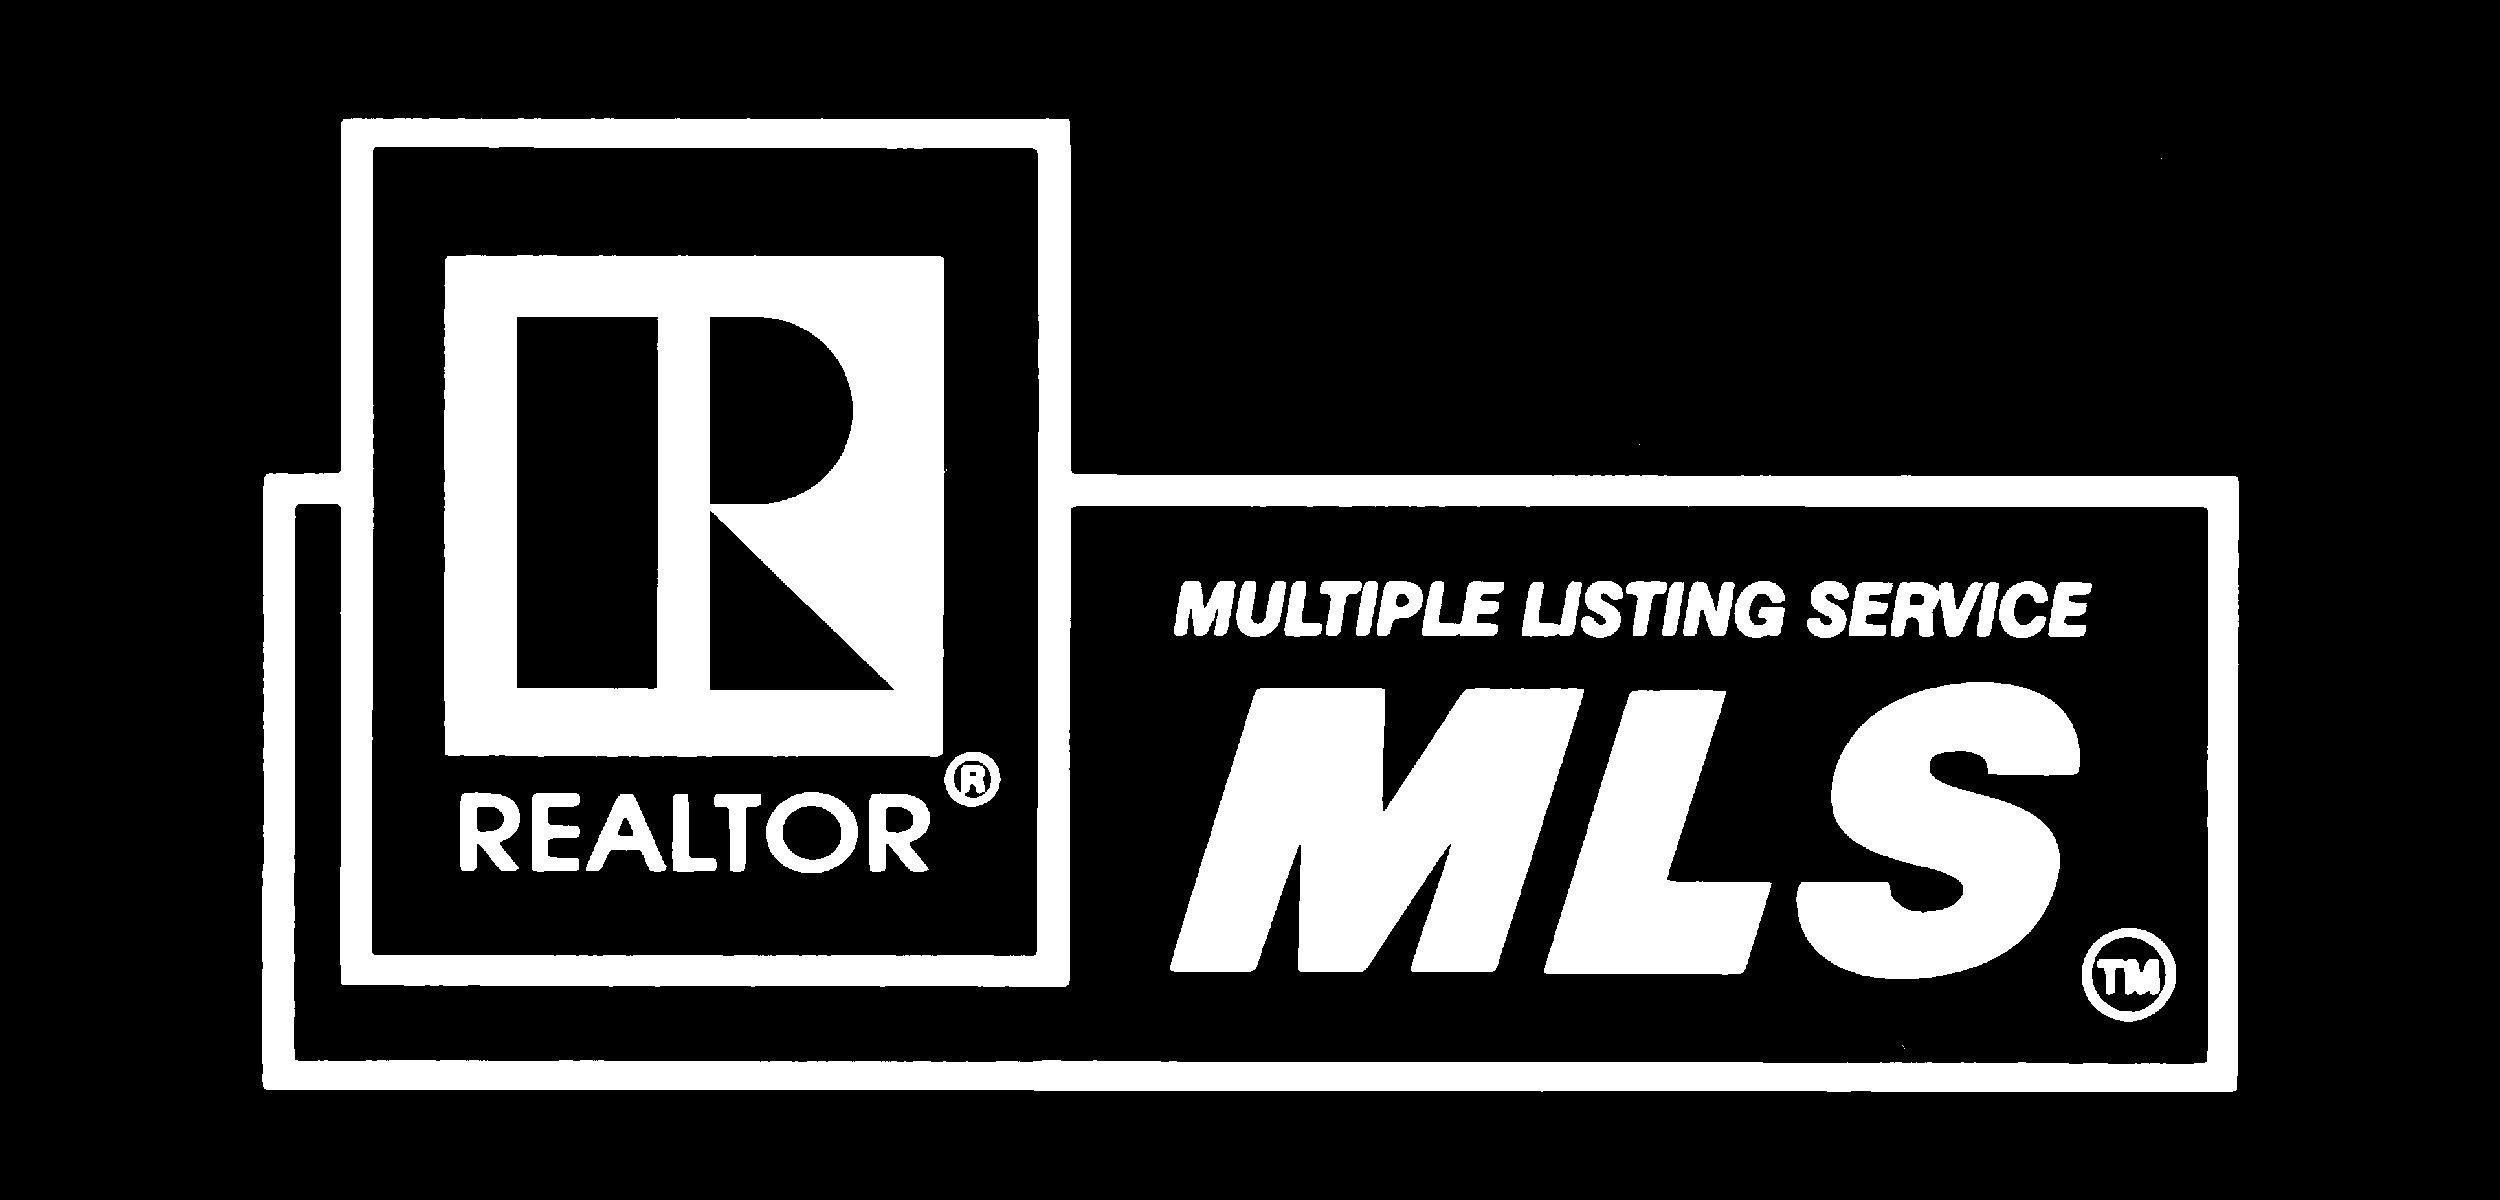 Realtor Logo - MLS Realtor Logo, MLS Realtor Symbol, Meaning, History and Evolution